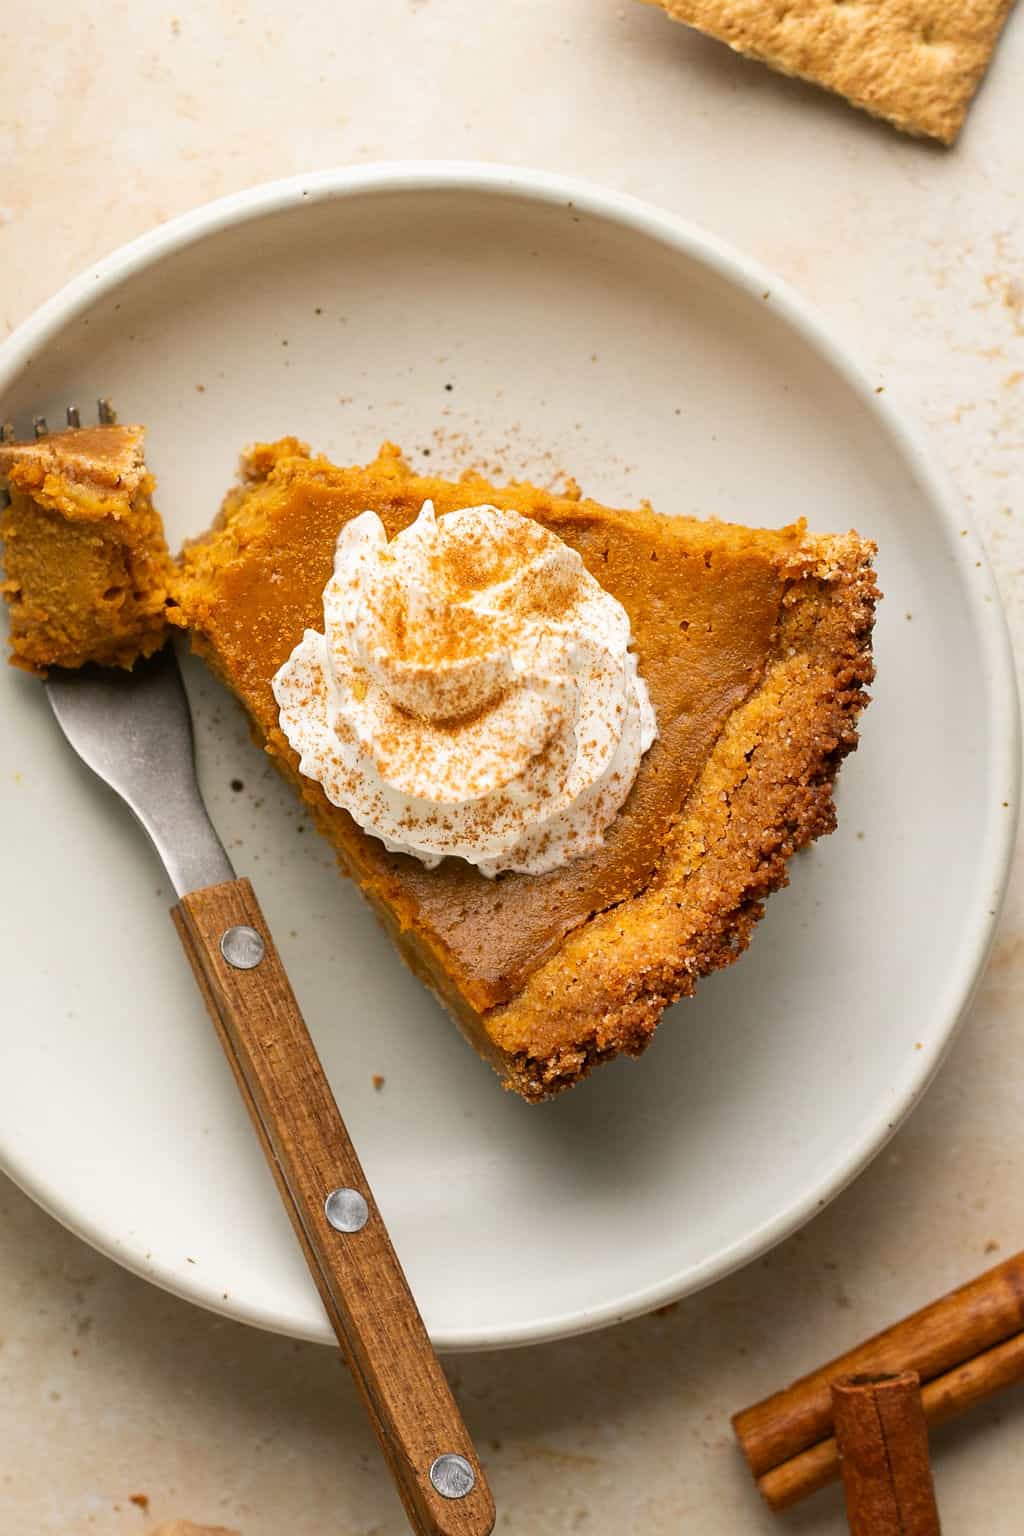 A slice of pumpkin pie with whipped cream and cinnamon on top with a bite taken out of it with a fork.